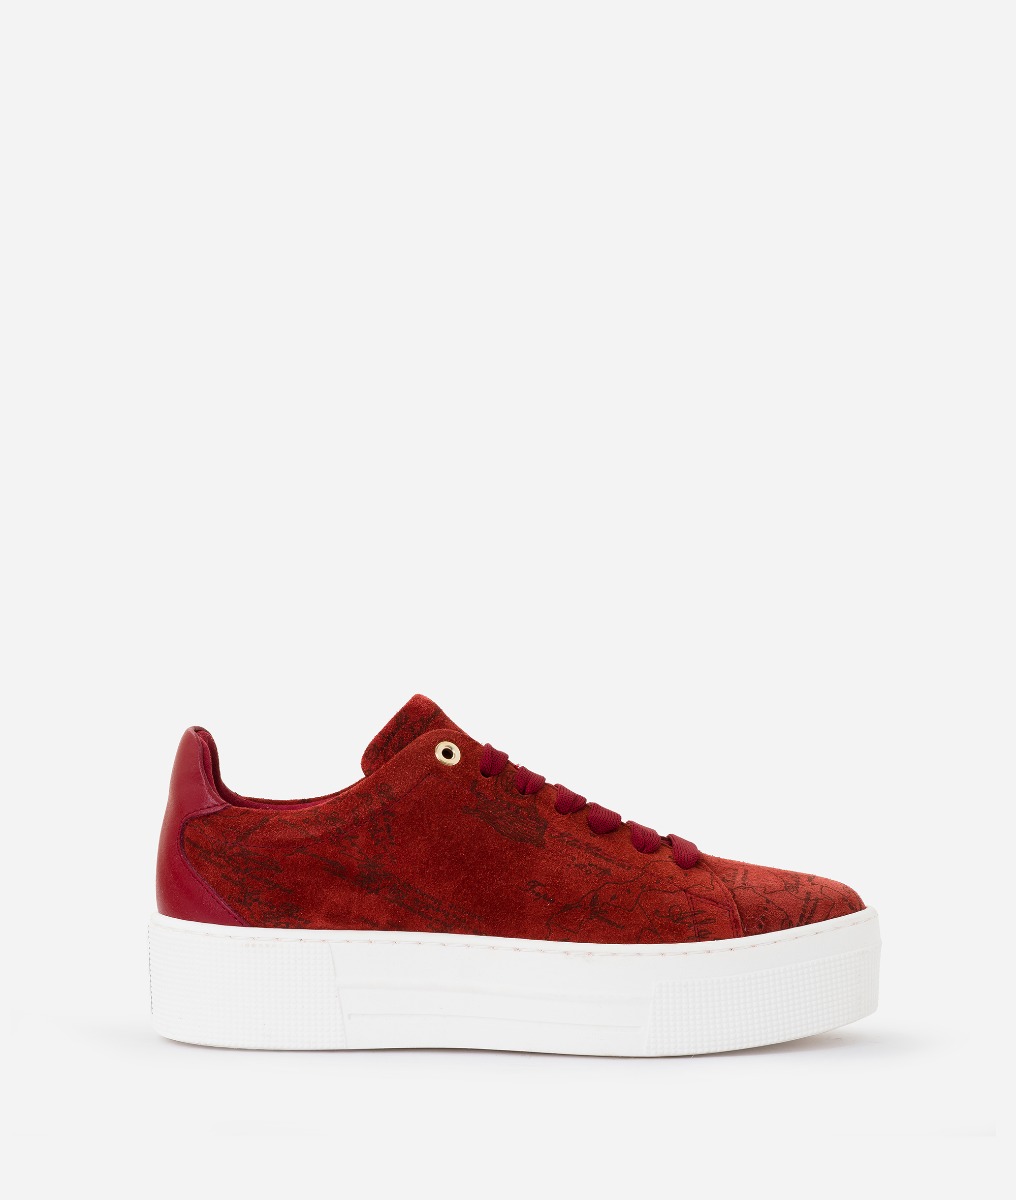 Suede Map Sneakers in pelle scamosciata Rosse